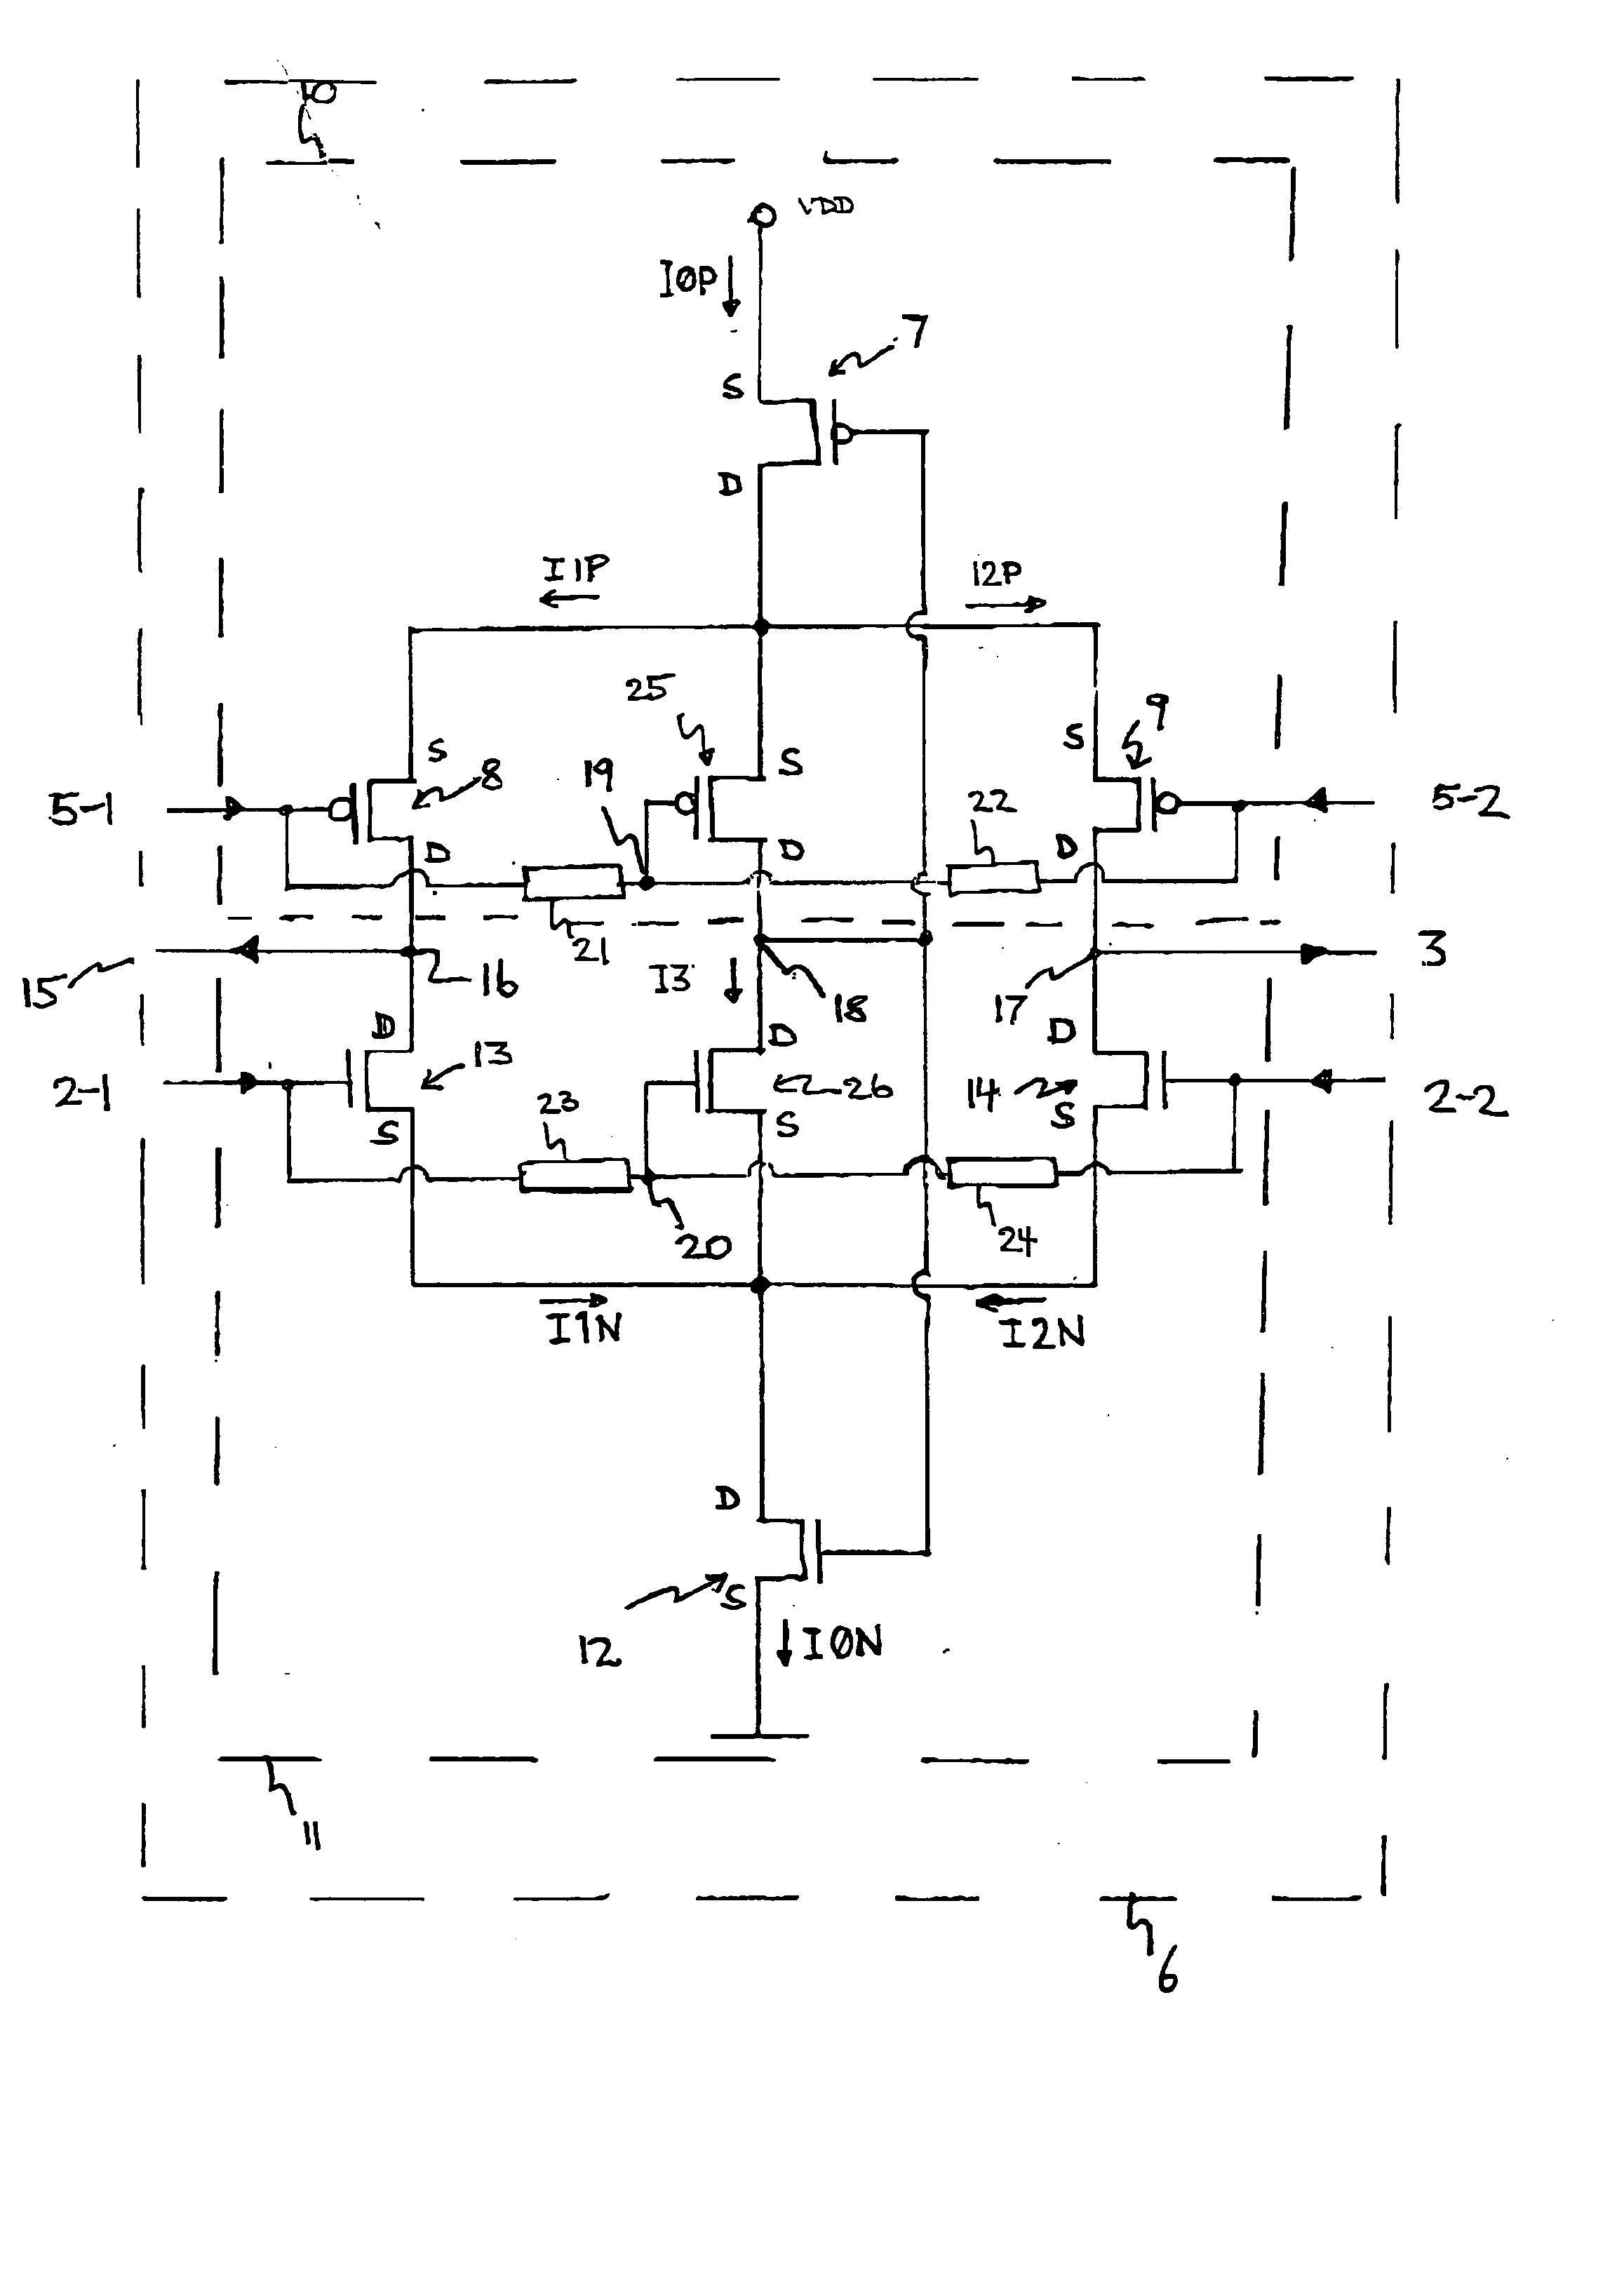 Differential to single-ended logic converter